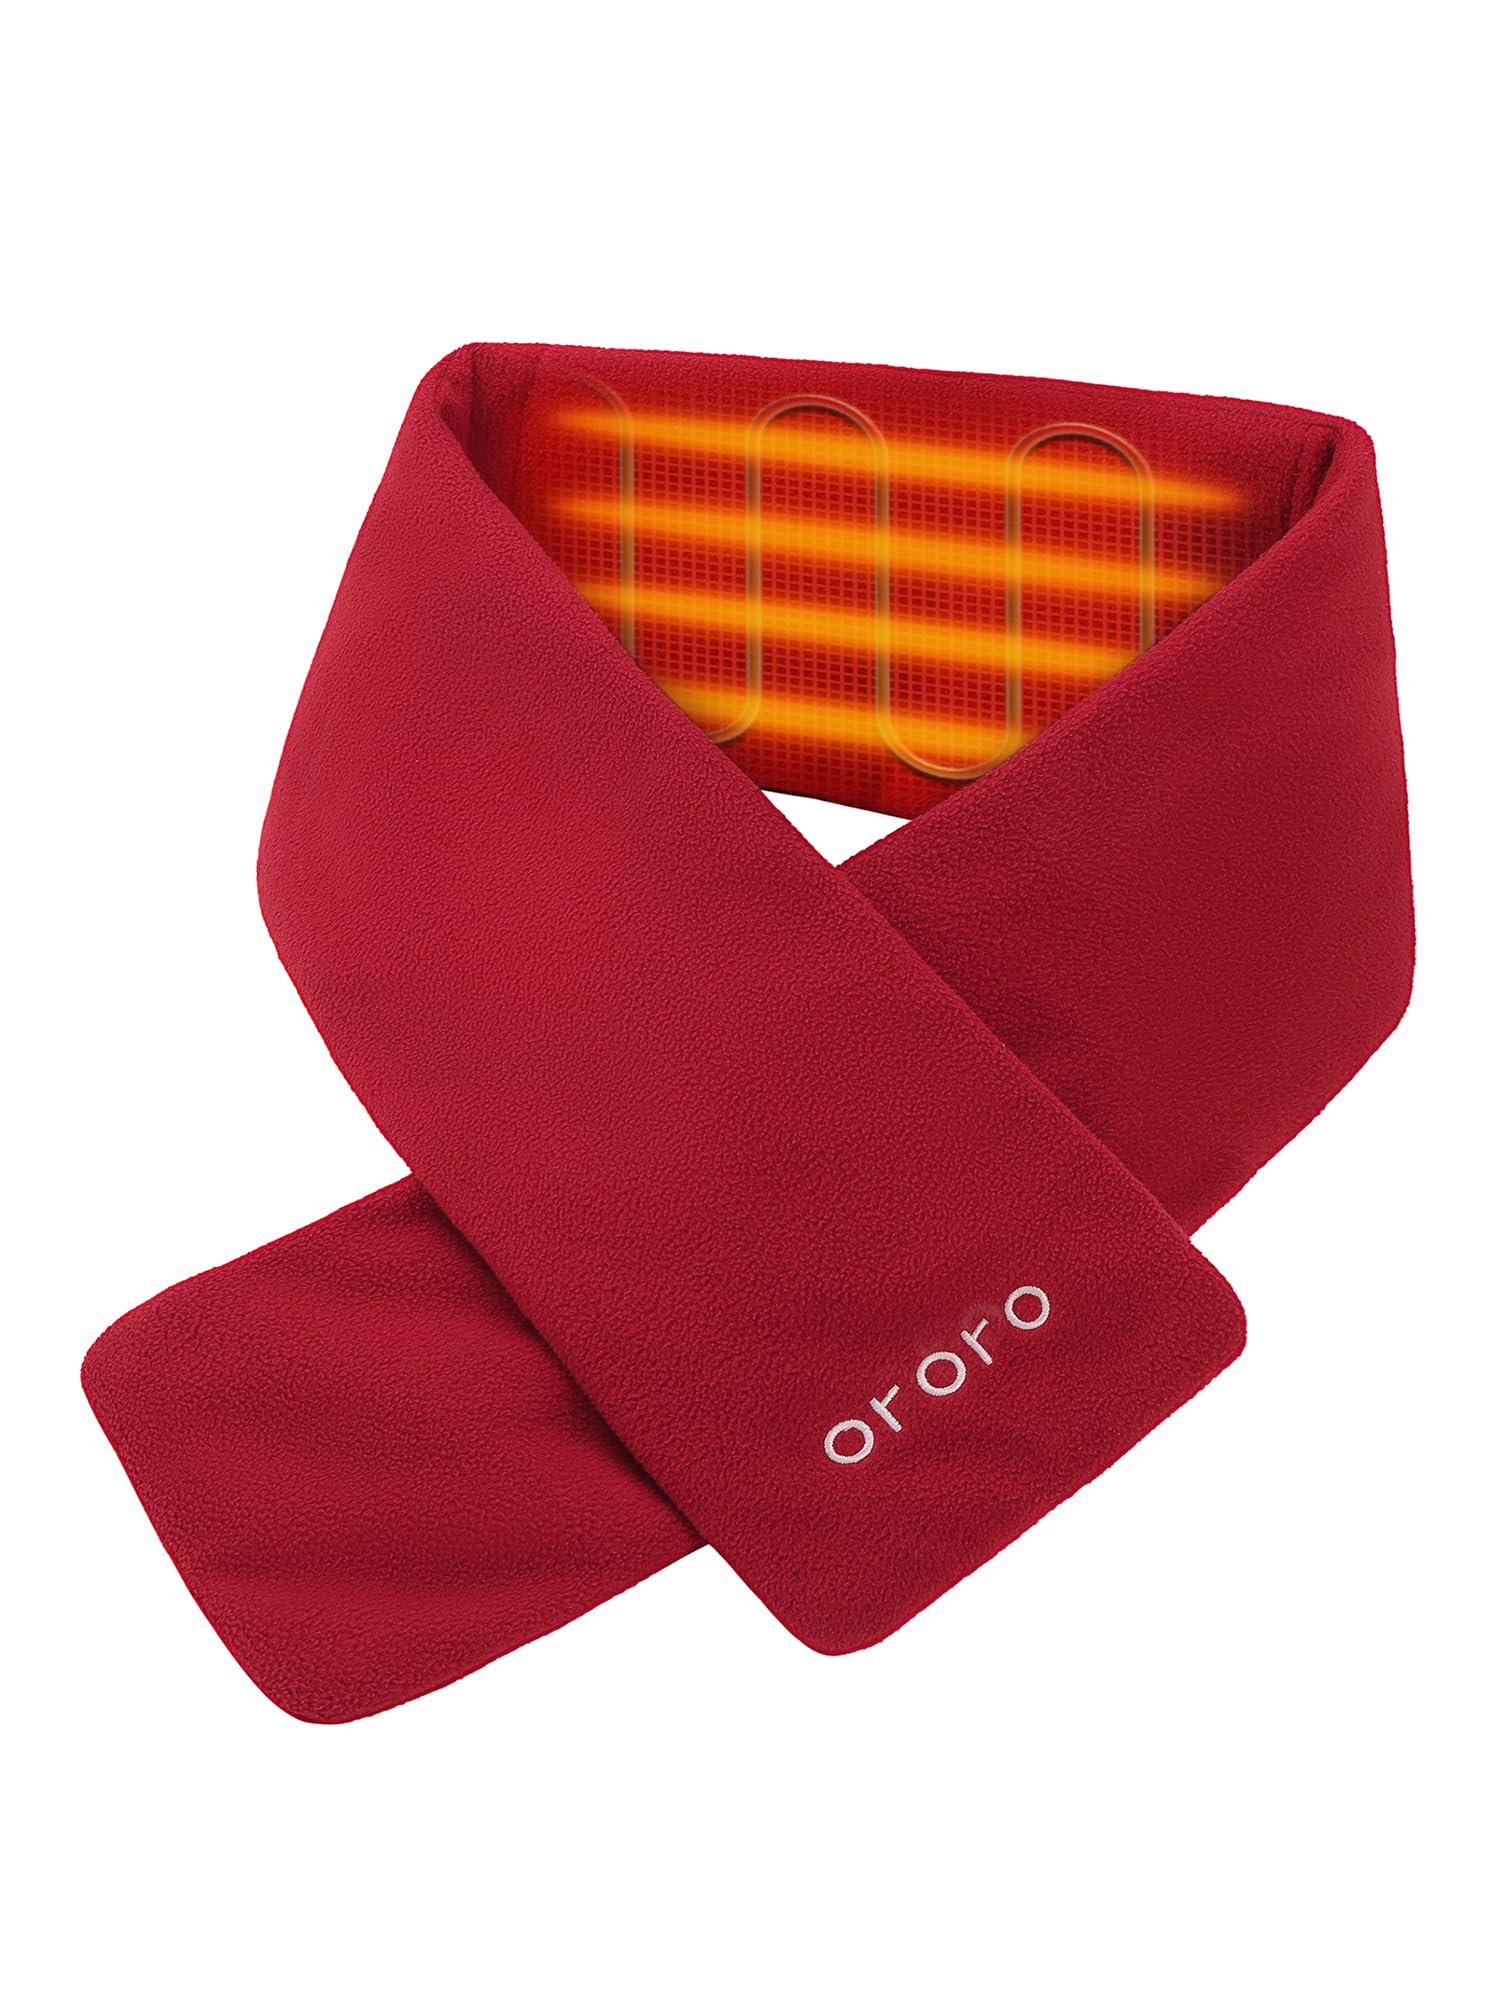 Ororo Men's or Women's Heated Scarf w/ Rechargeable Battery (Red) $55.80 + Free Shipping